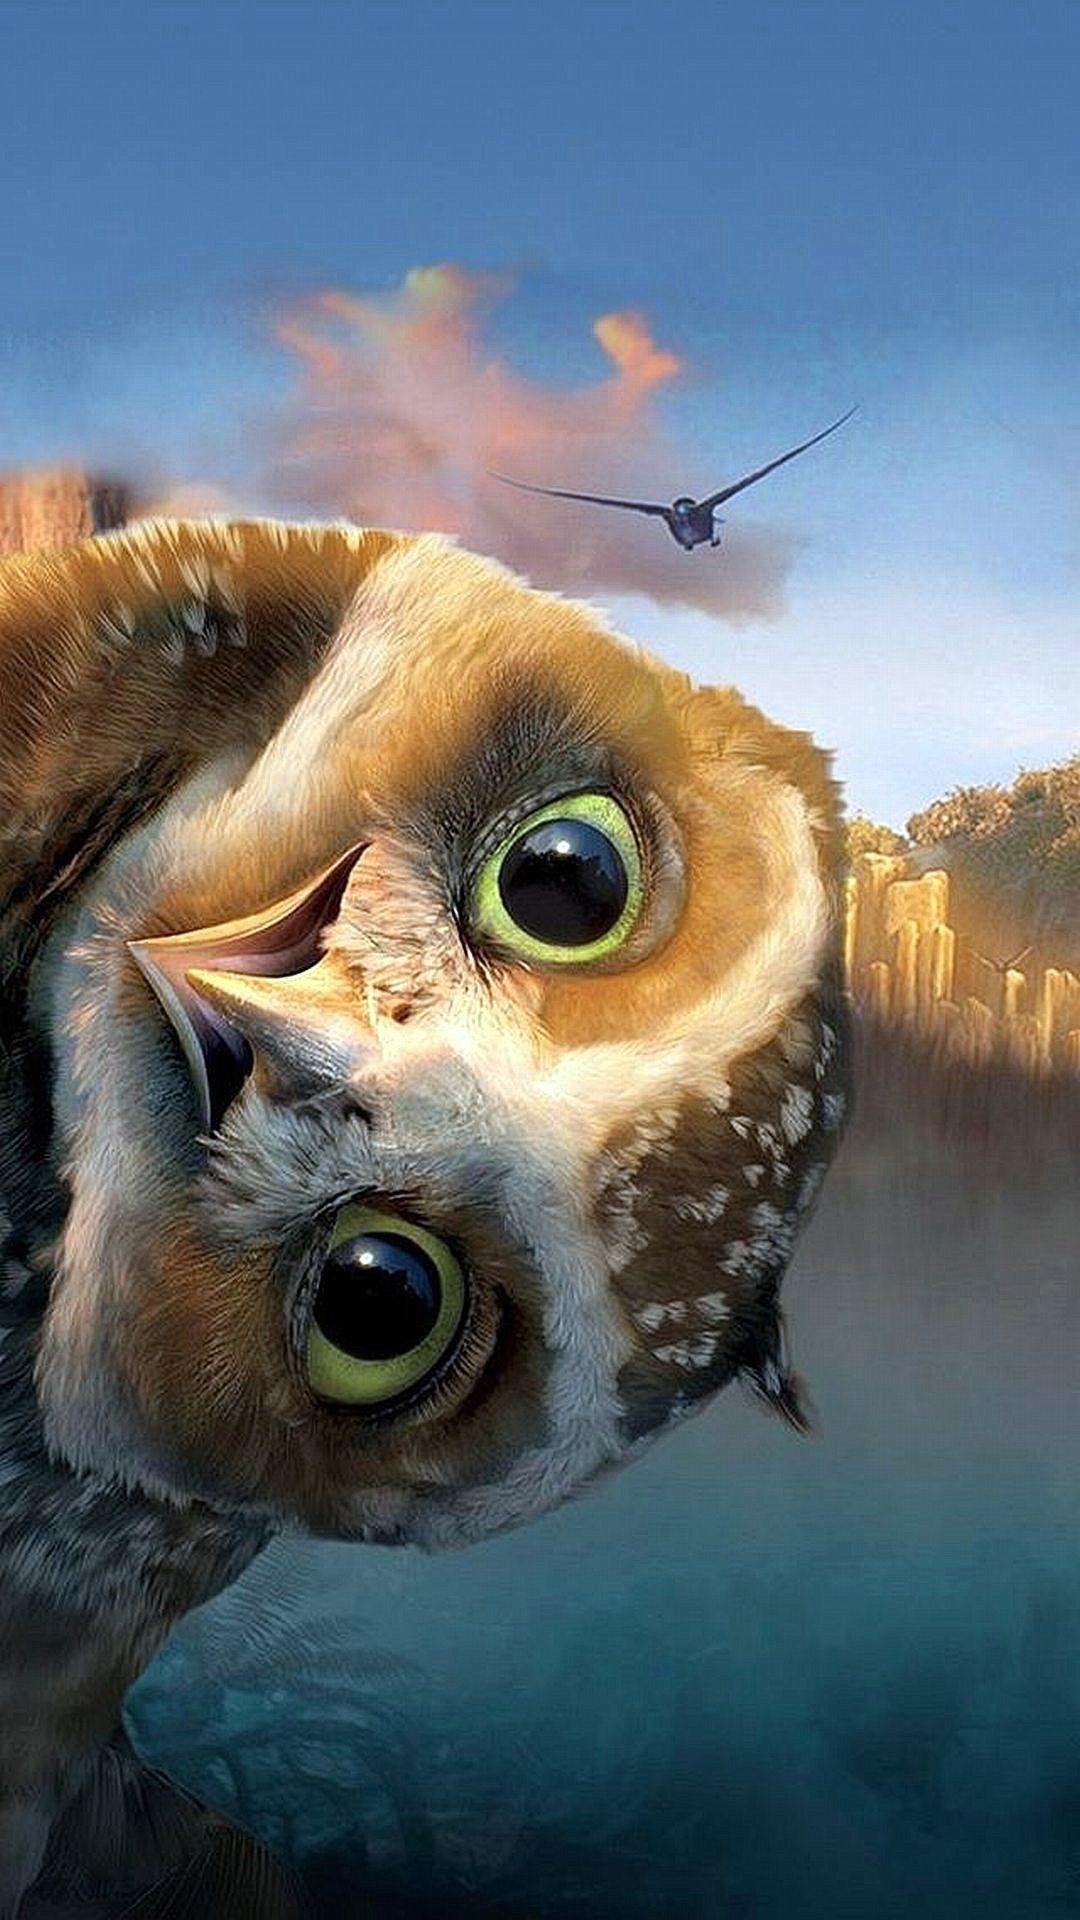 Funny Owl Pose to see more funny wallpaper for good giggles